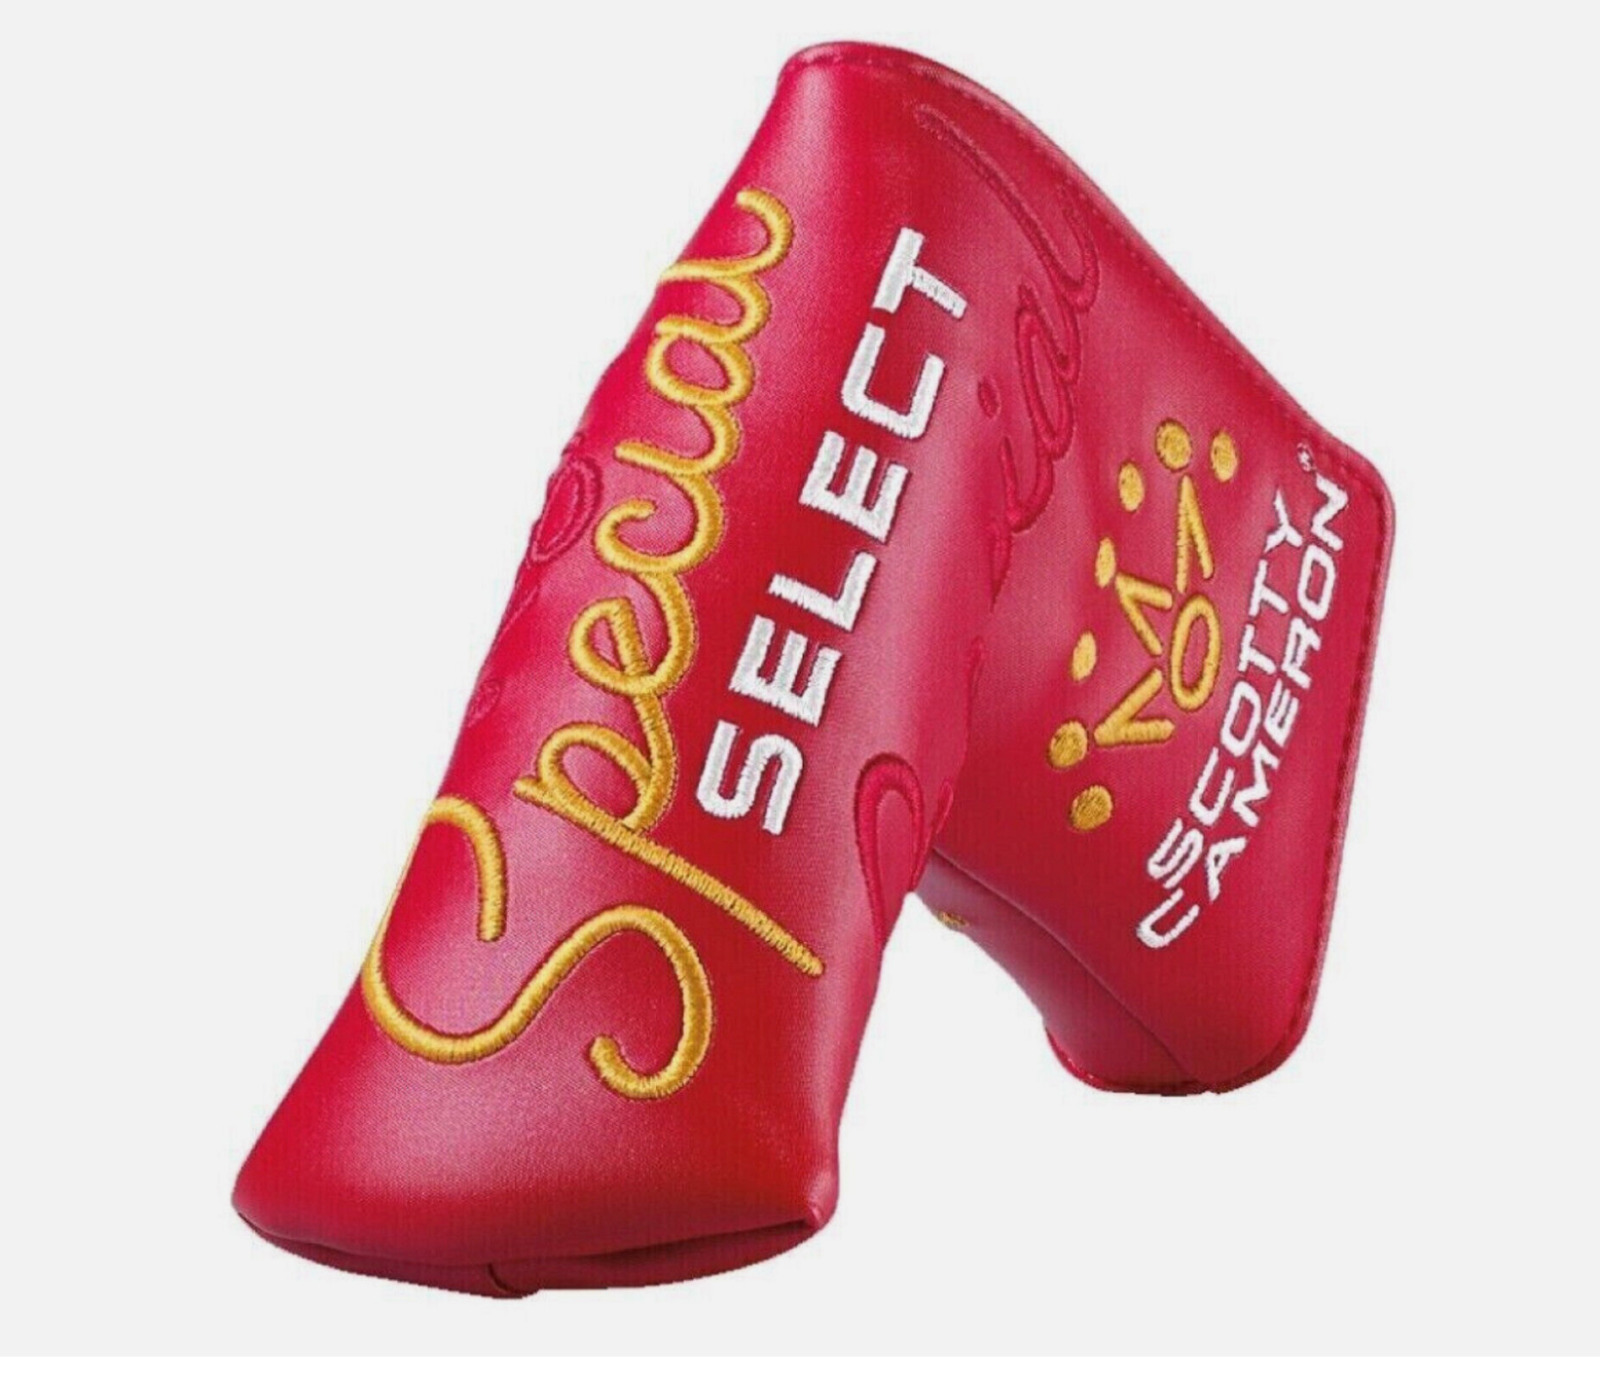 SCOTTY CAMERON SPECIAL SELECT NEWPORT BLADE PUTTER HEADCOVER COVER - NEW